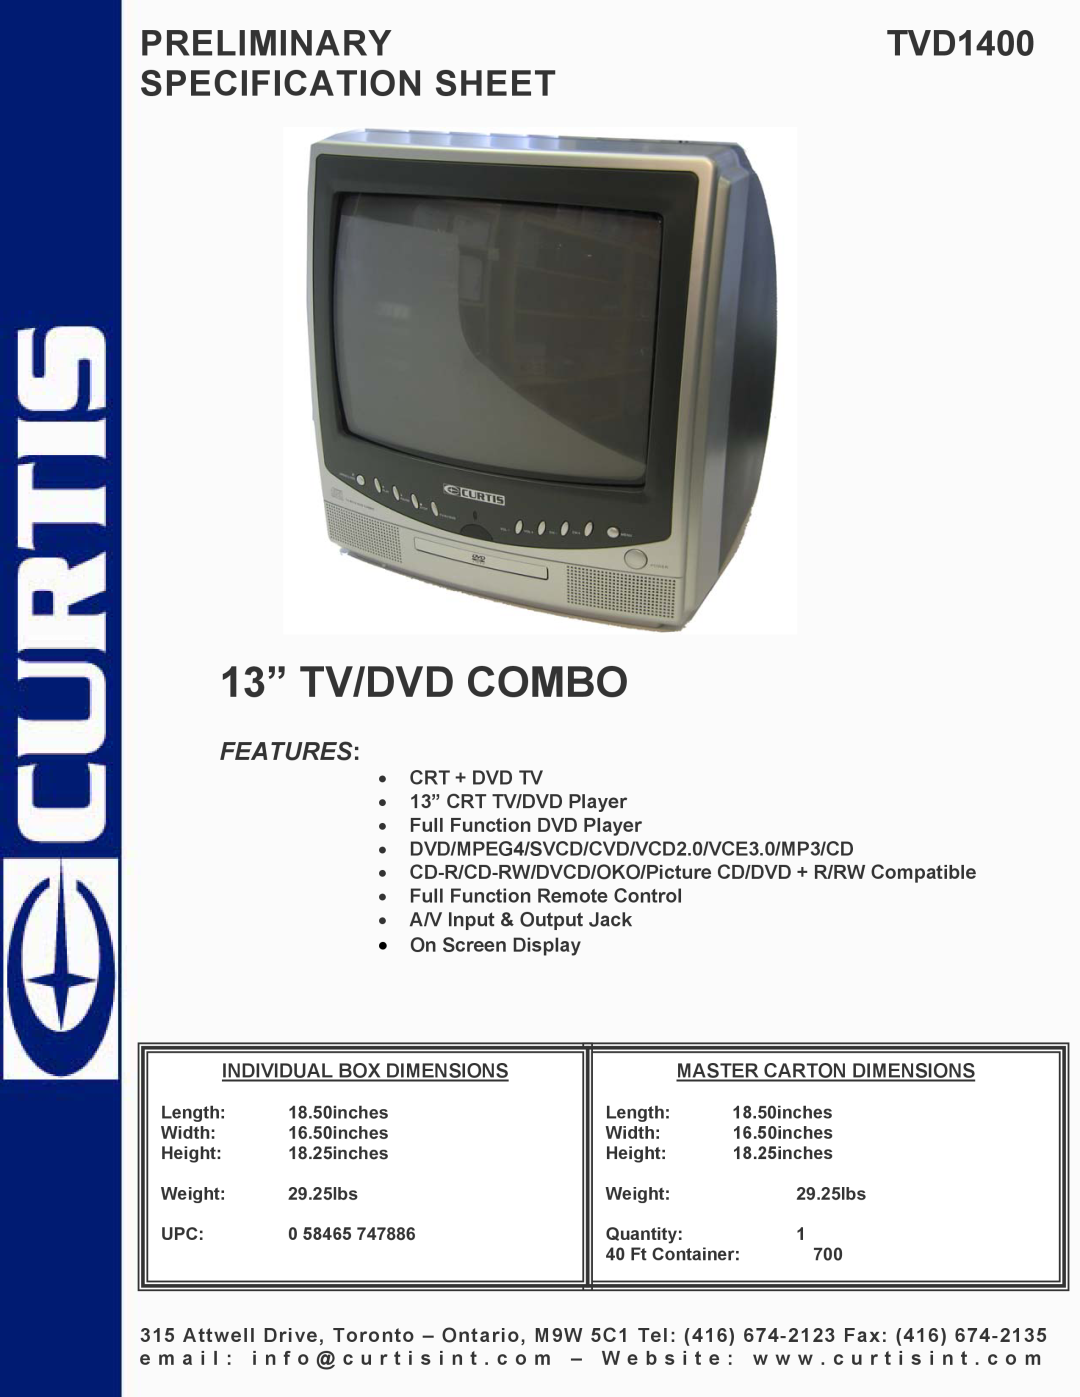 Curtis specifications 13” TV/DVD COMBO, PRELIMINARYTVD1400 SPECIFICATION SHEET, Features 